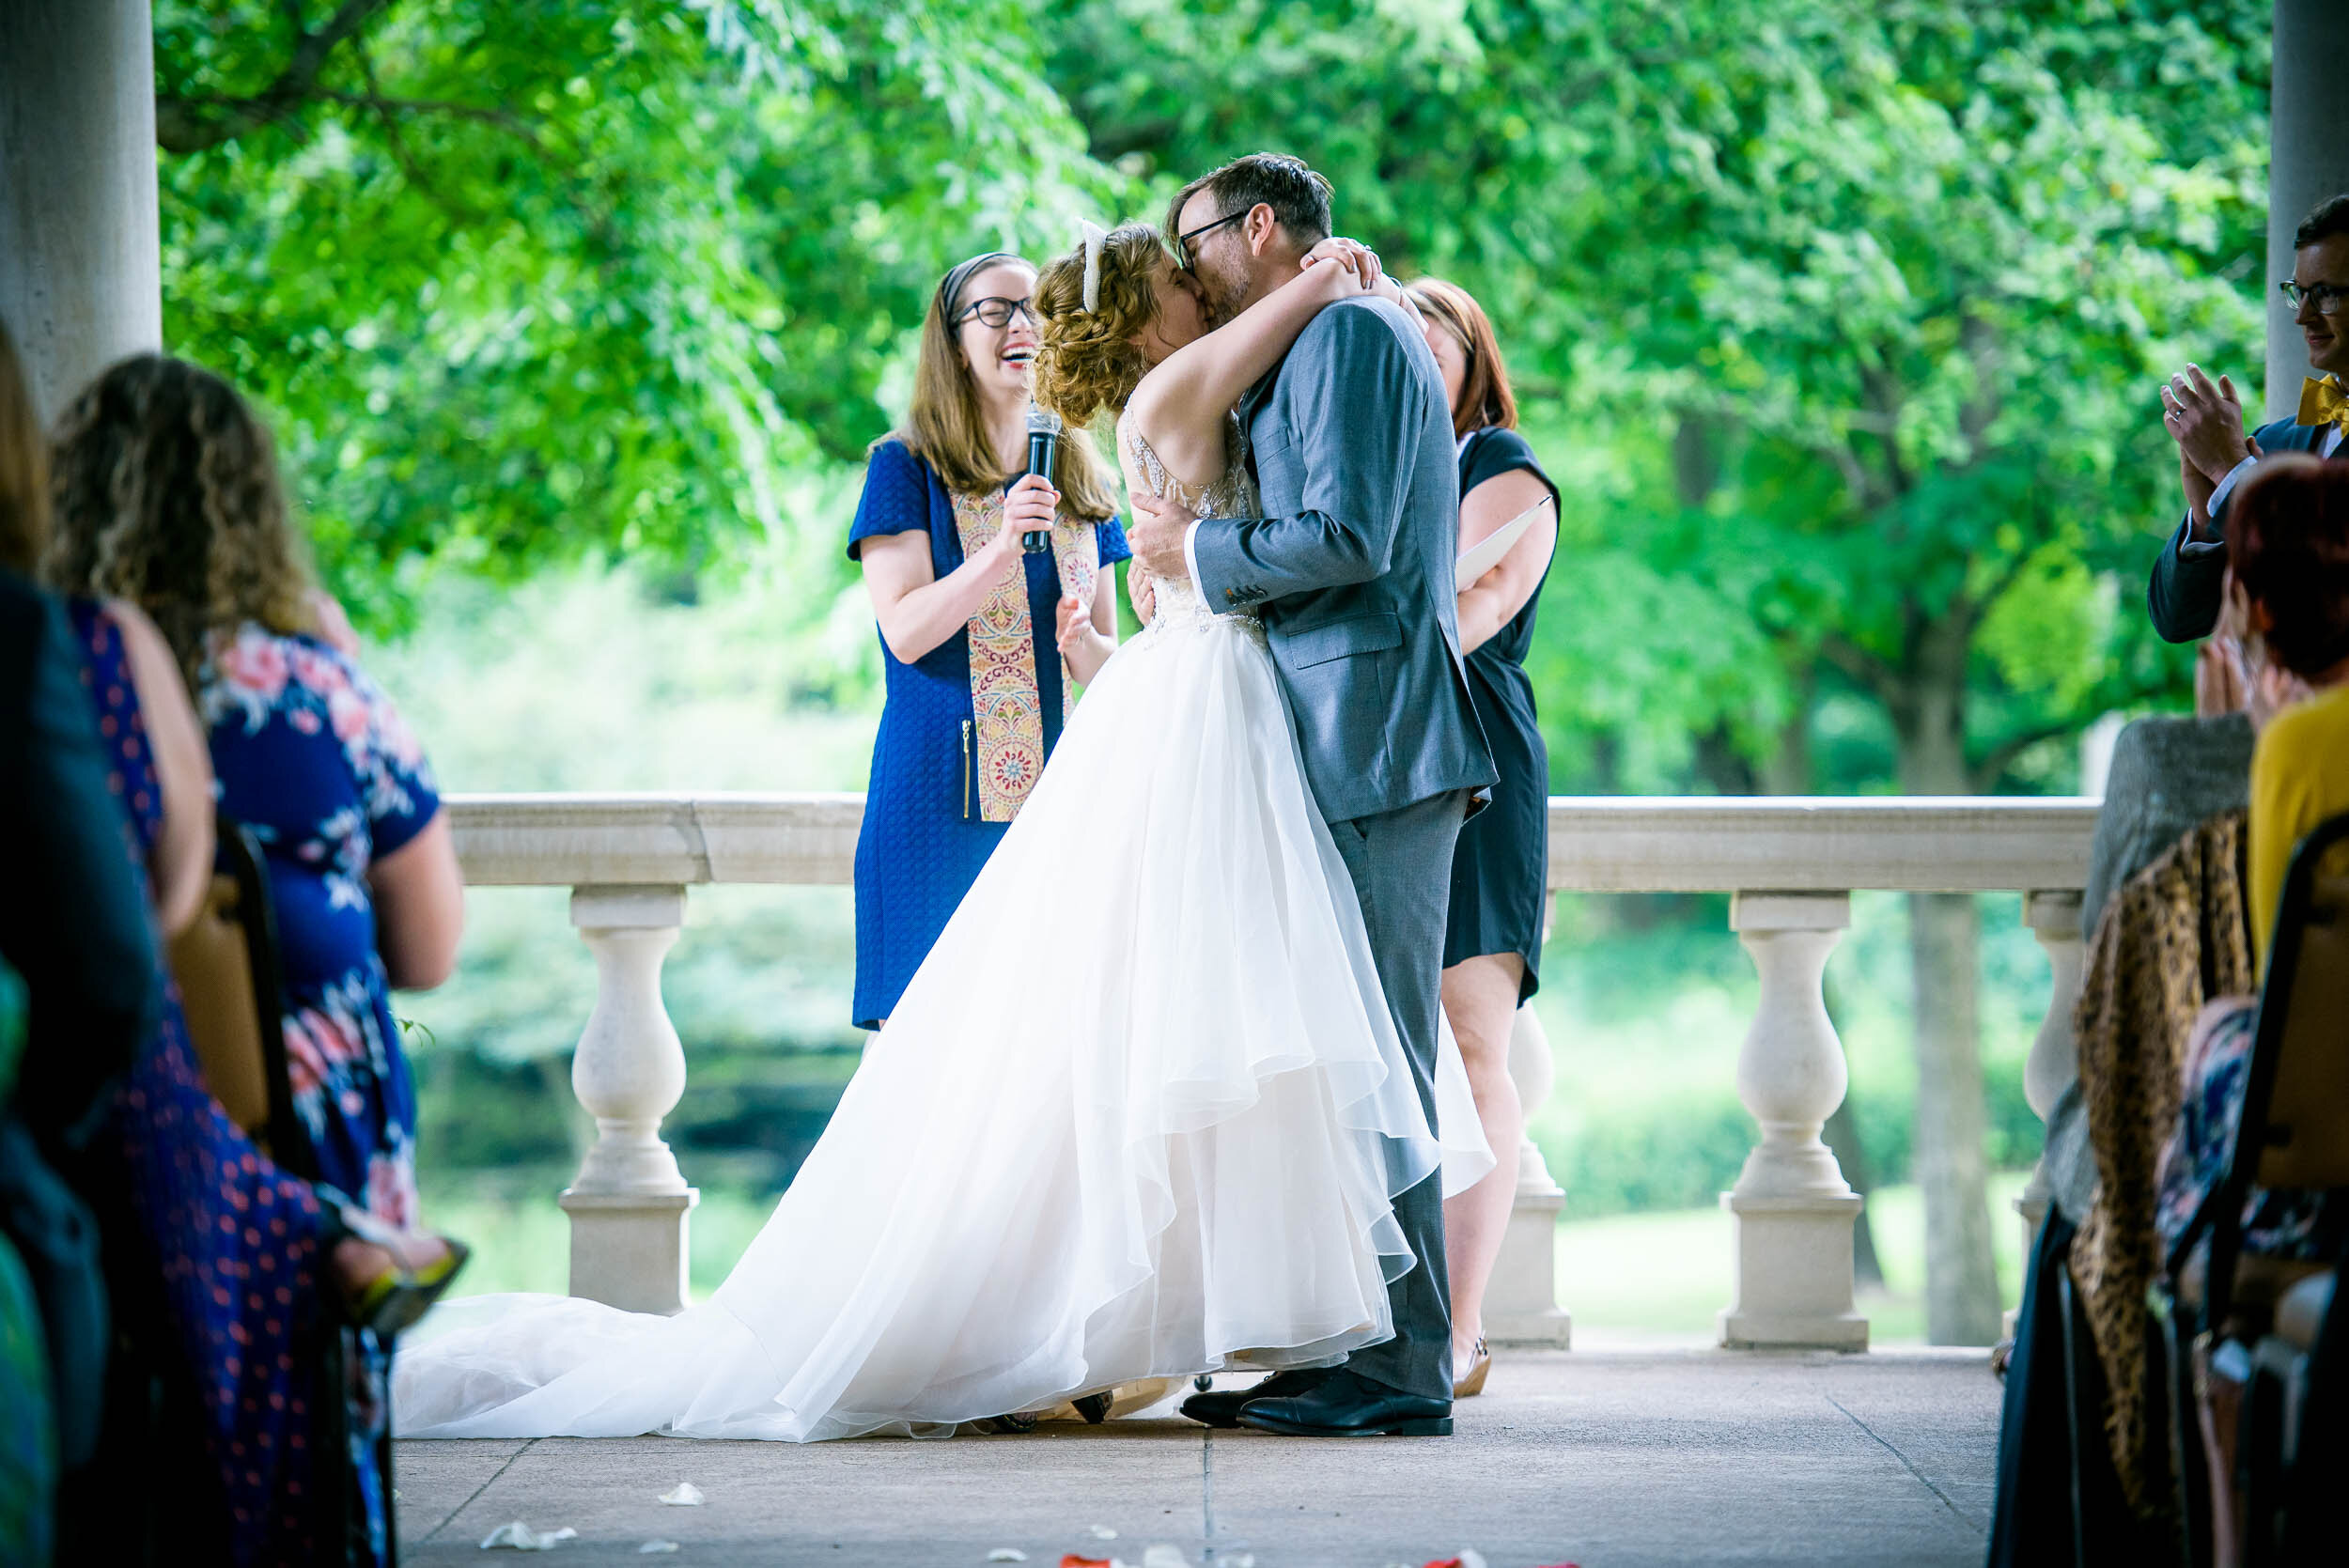 Bride and groom kiss during their ceremony: Columbus Park Refectory Chicago wedding captured by J. Brown Photography.